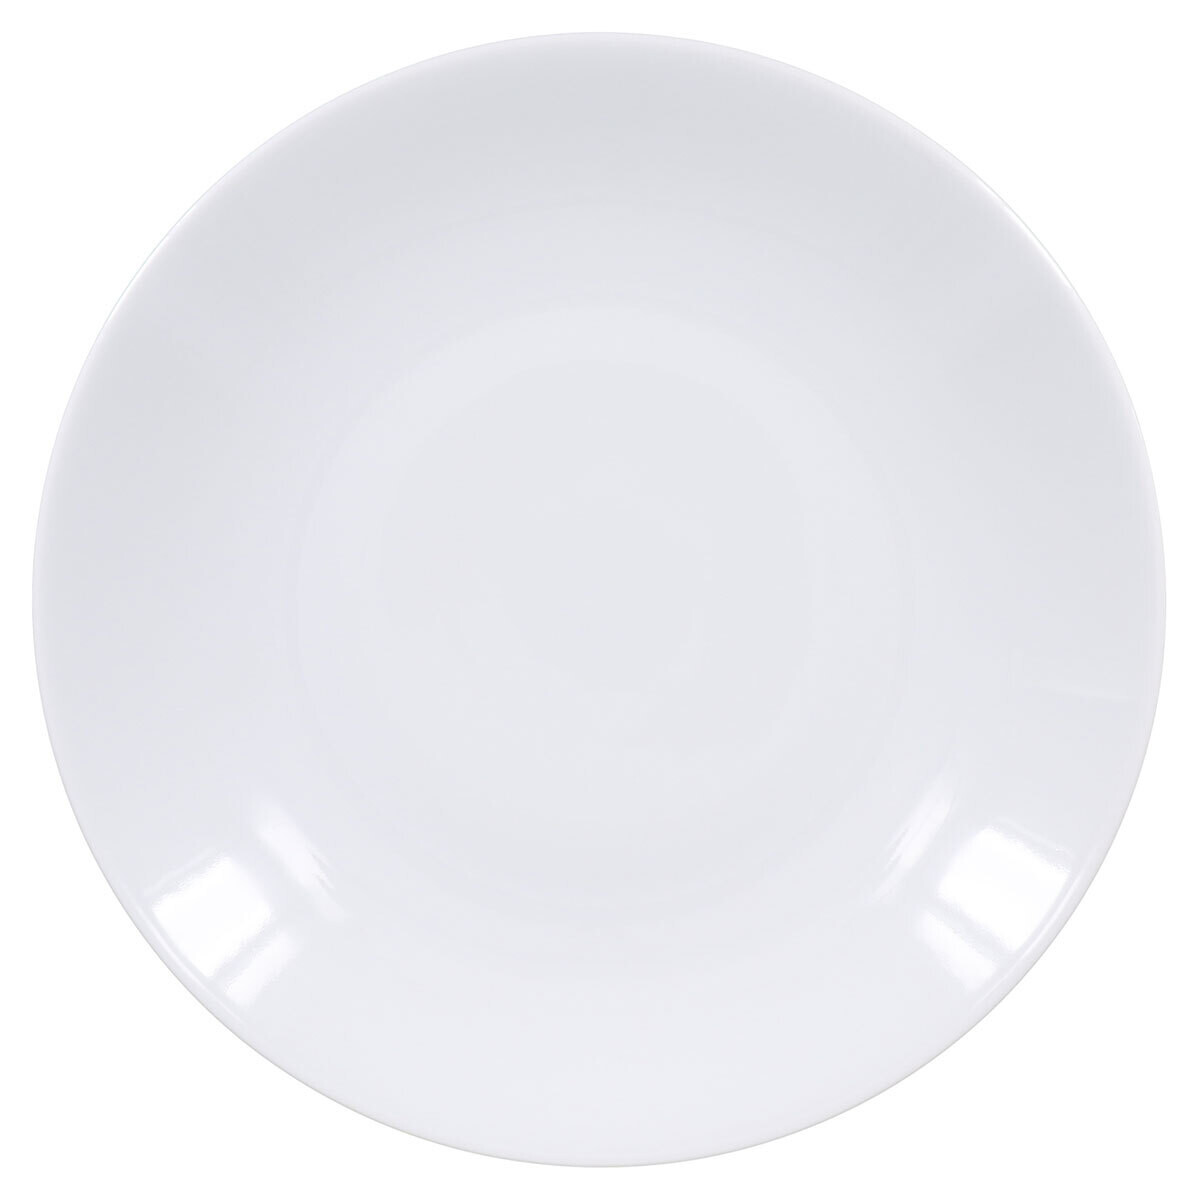 Royal Limoges Coupe White Dinner Plate 10.5 Inch B265-COU00001